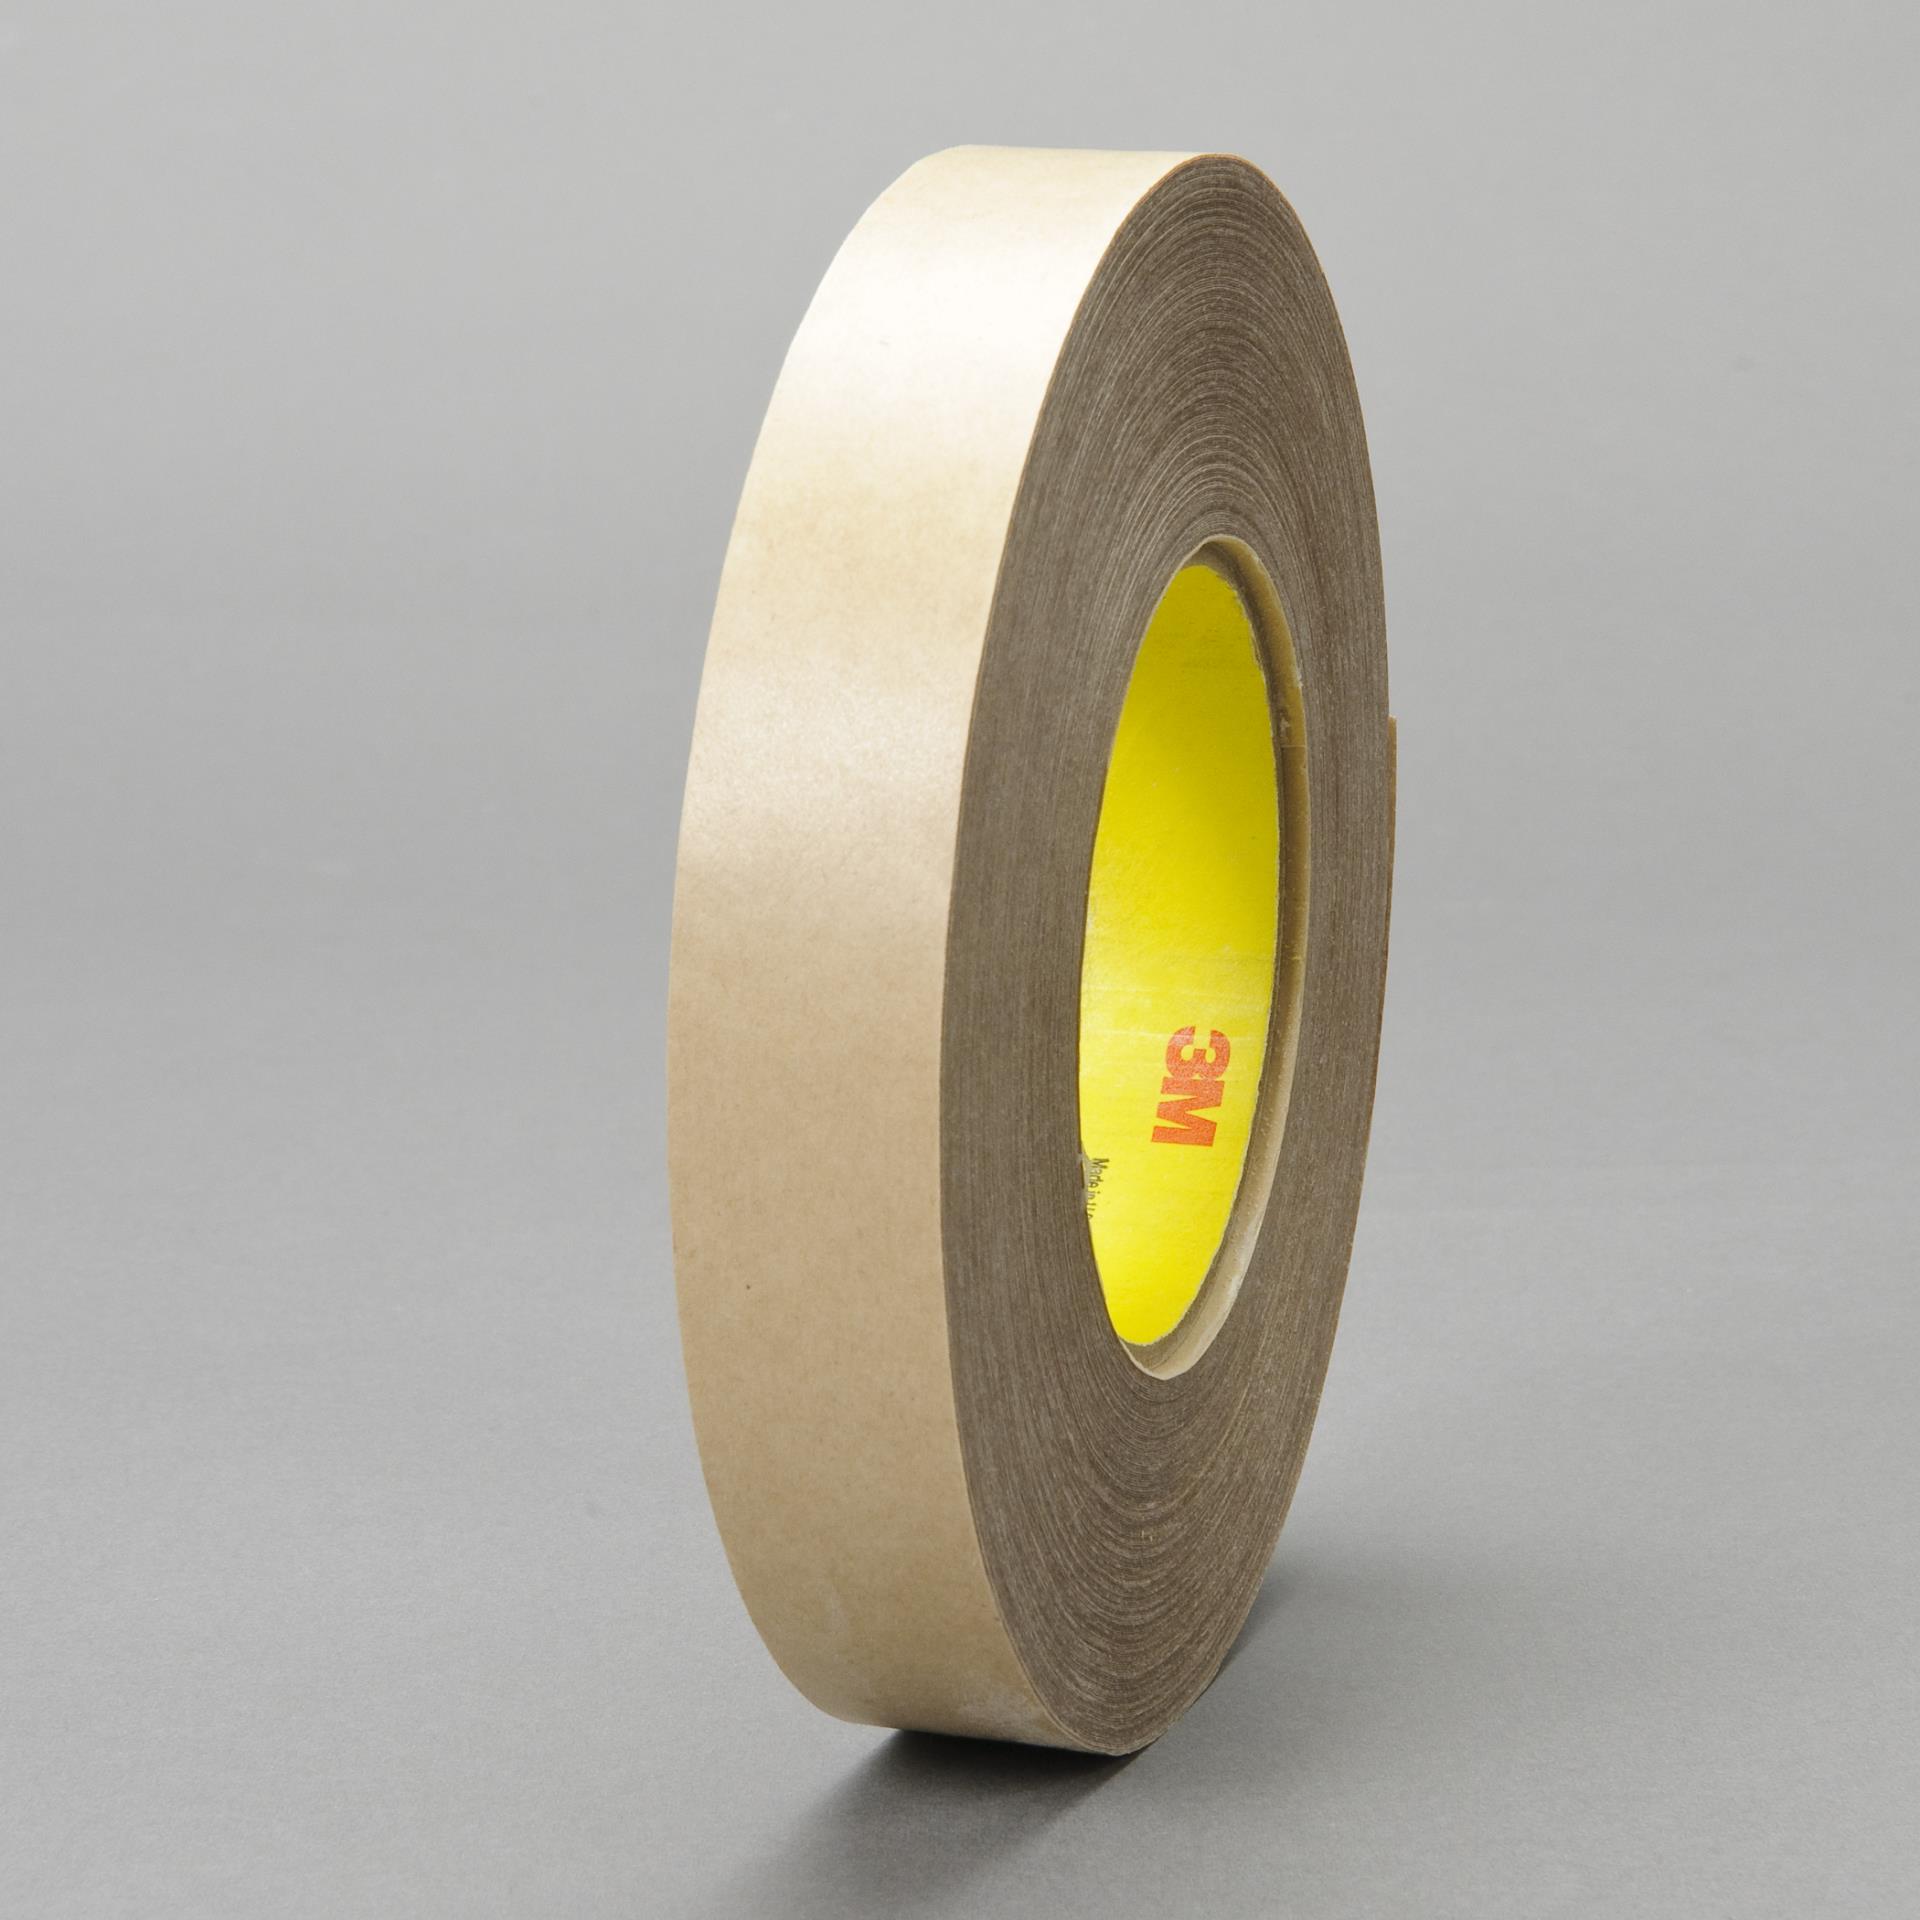 00021200407833 3M™ Adhesive Transfer Tape 9485PC, Clear, 36 in x 60 yd,  Mil, 1/Case Aircraft products adhesive-transfer-tapes 9356912